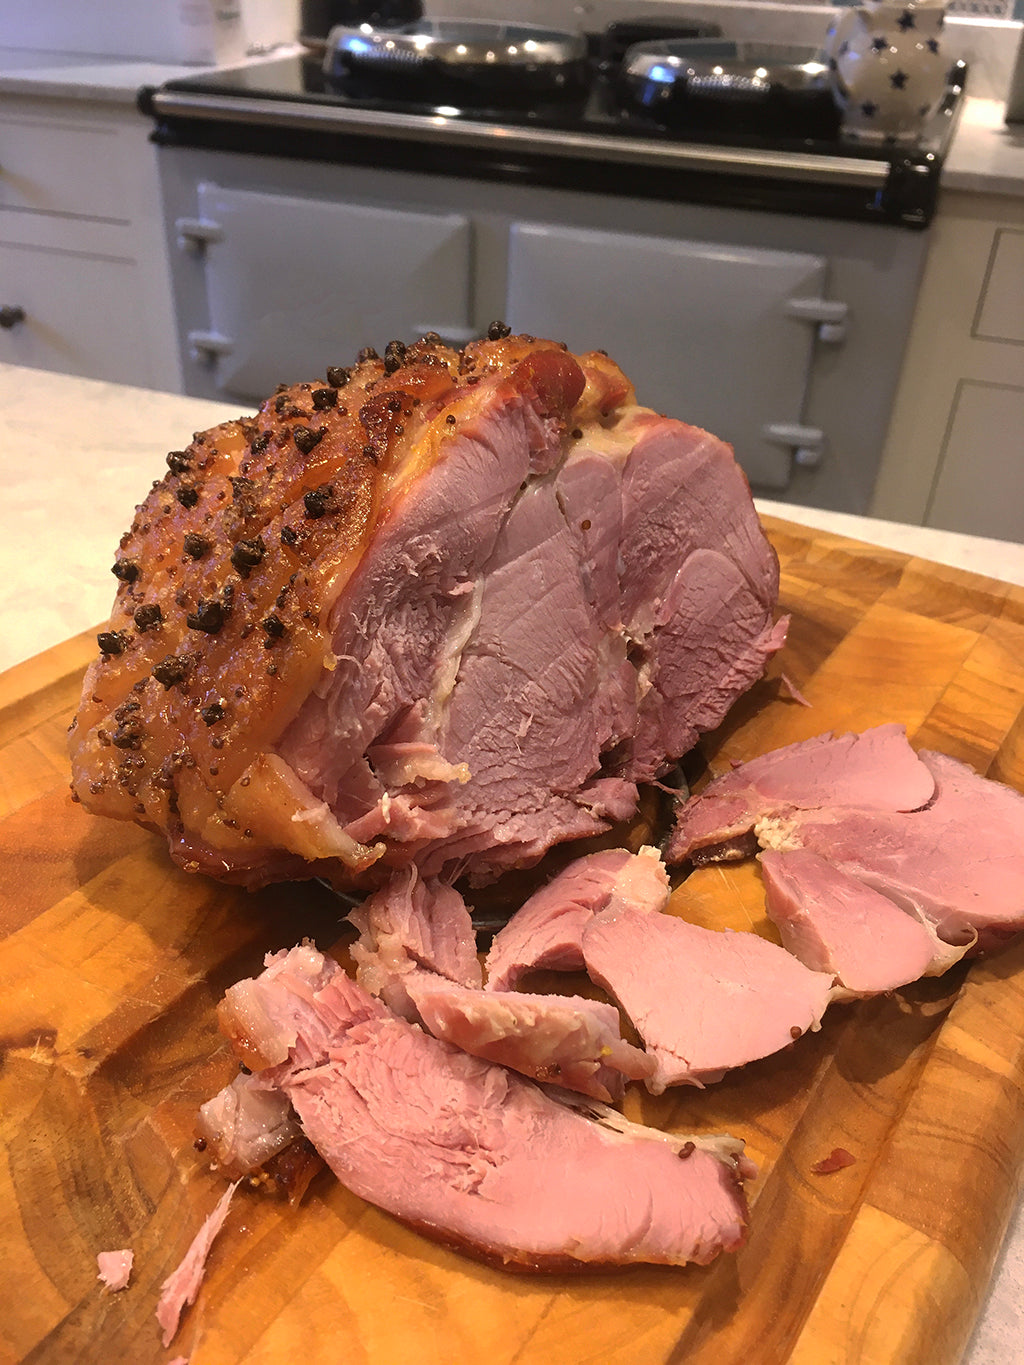 How To Cook Festive Gammon Ham In An Aga Range Cooker - sticky Cider & Maple